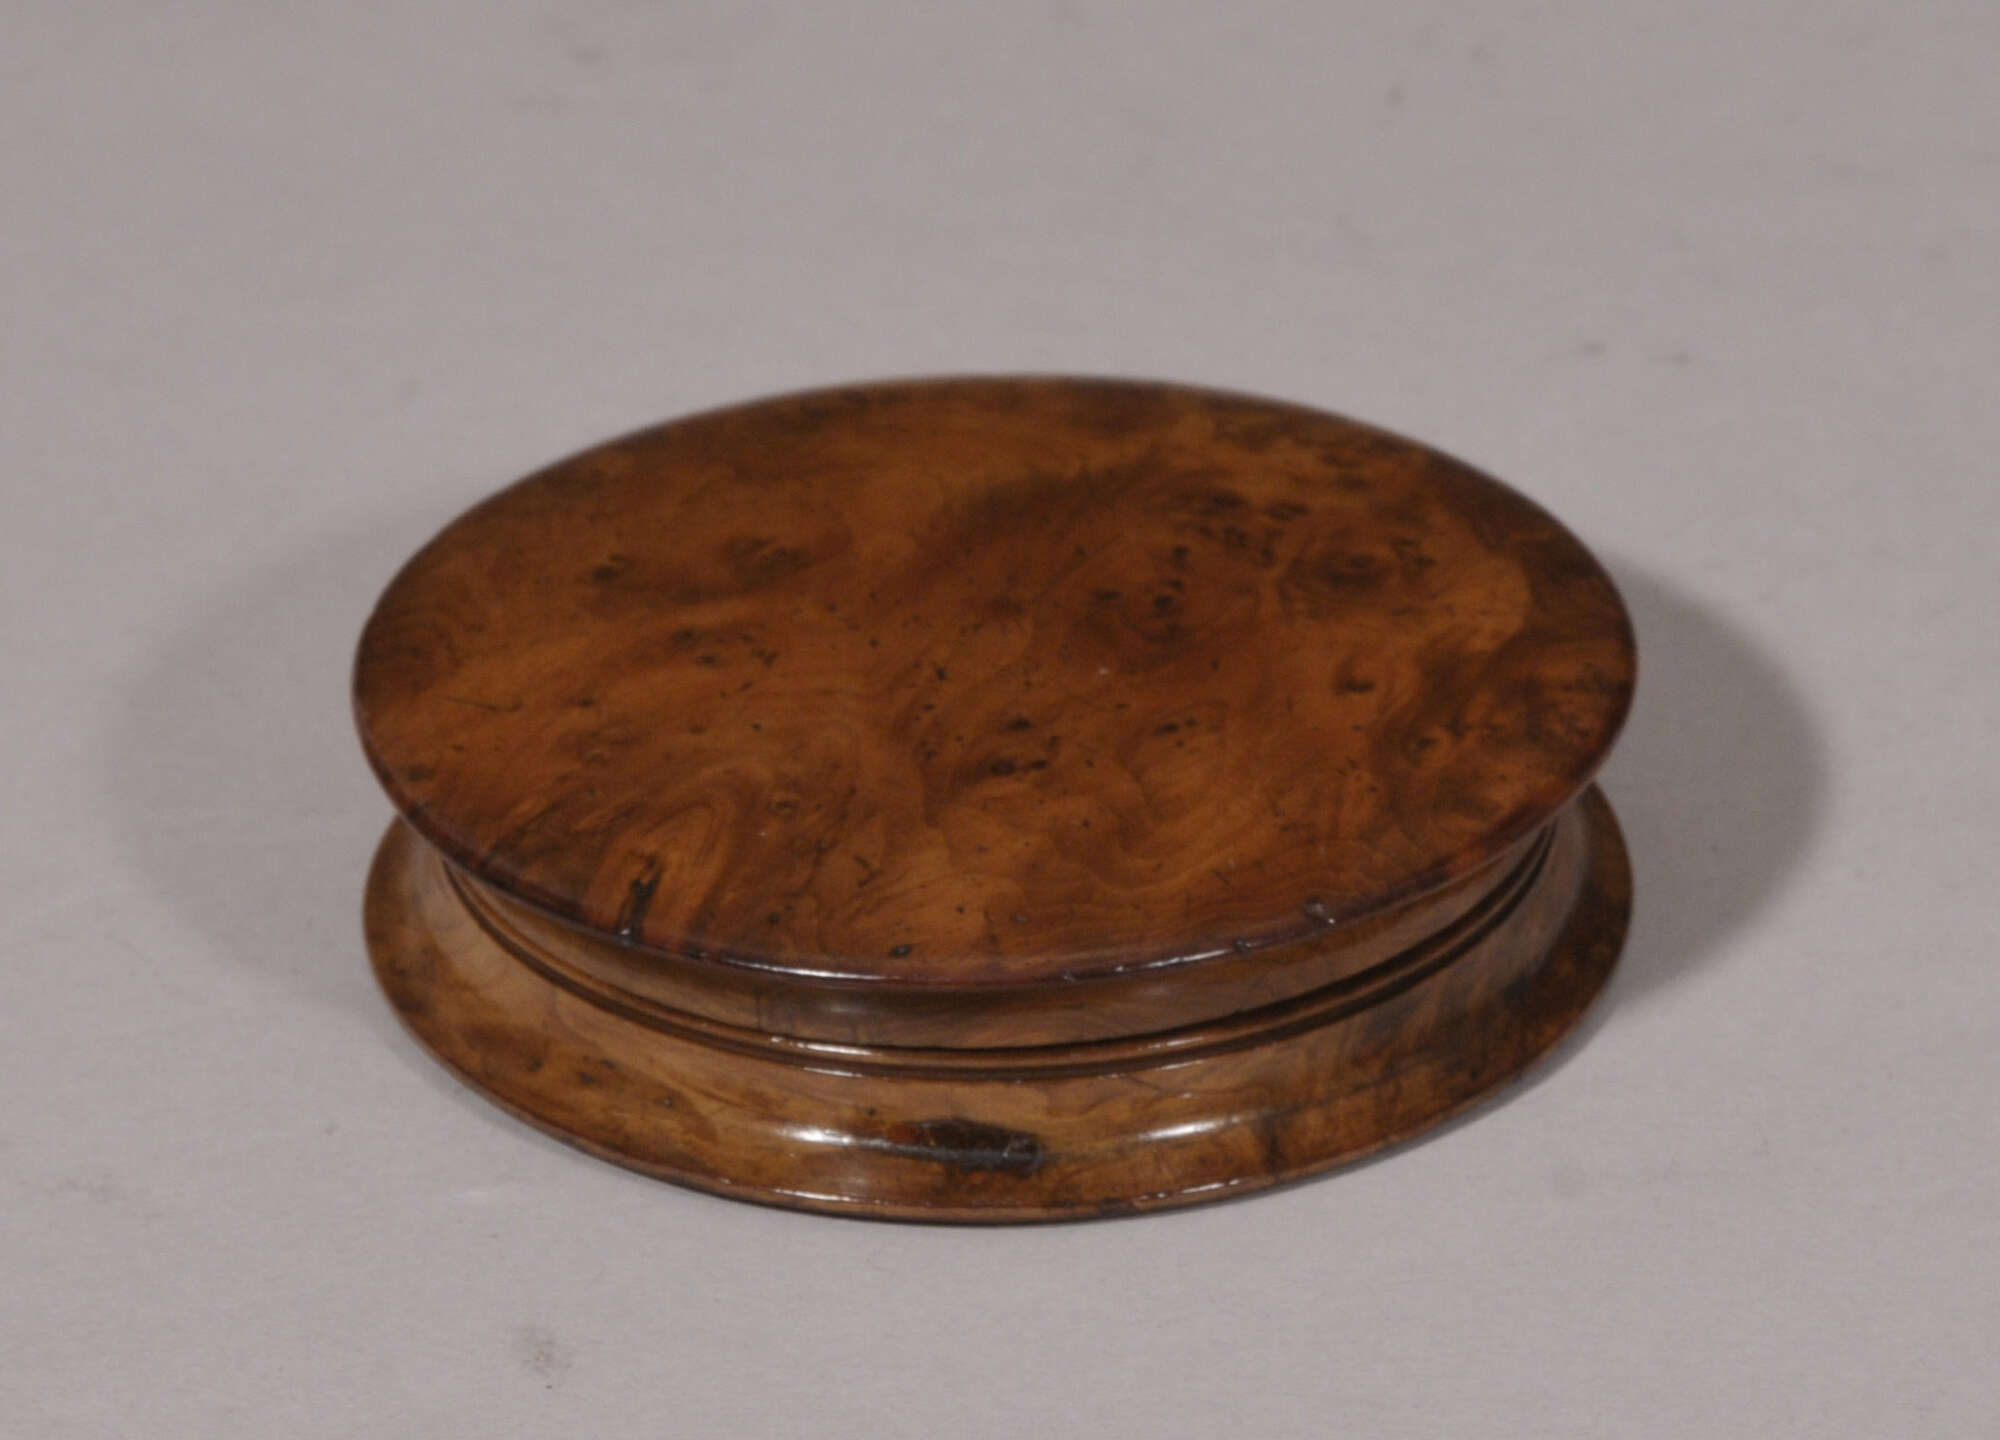 Sold at Auction: A Fine 19th Century Burr Yew-wood Snuff Box. The casing of  octagonal tubular form inlaid with ebony